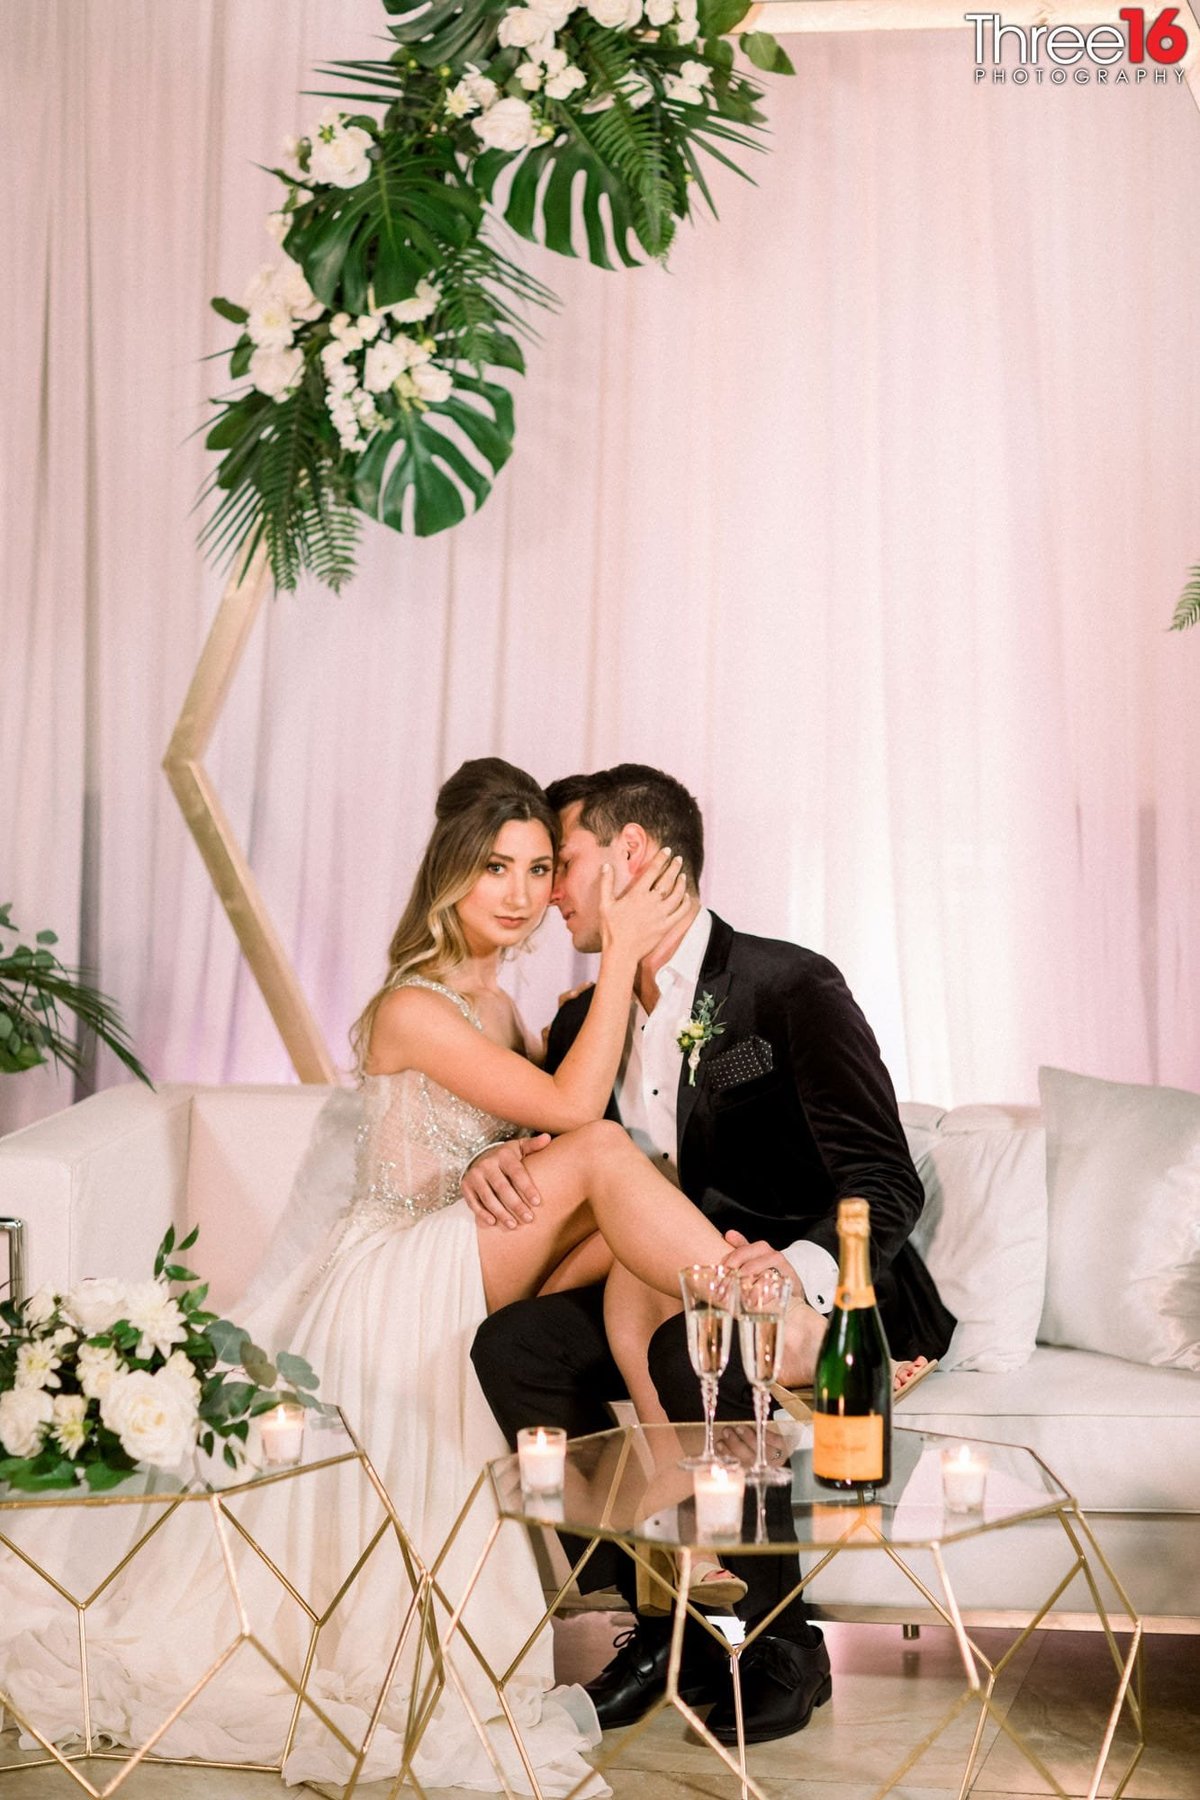 Bride places her legs across her Groom's lap and her hand on his cheek as he goes in for a kiss on her cheek